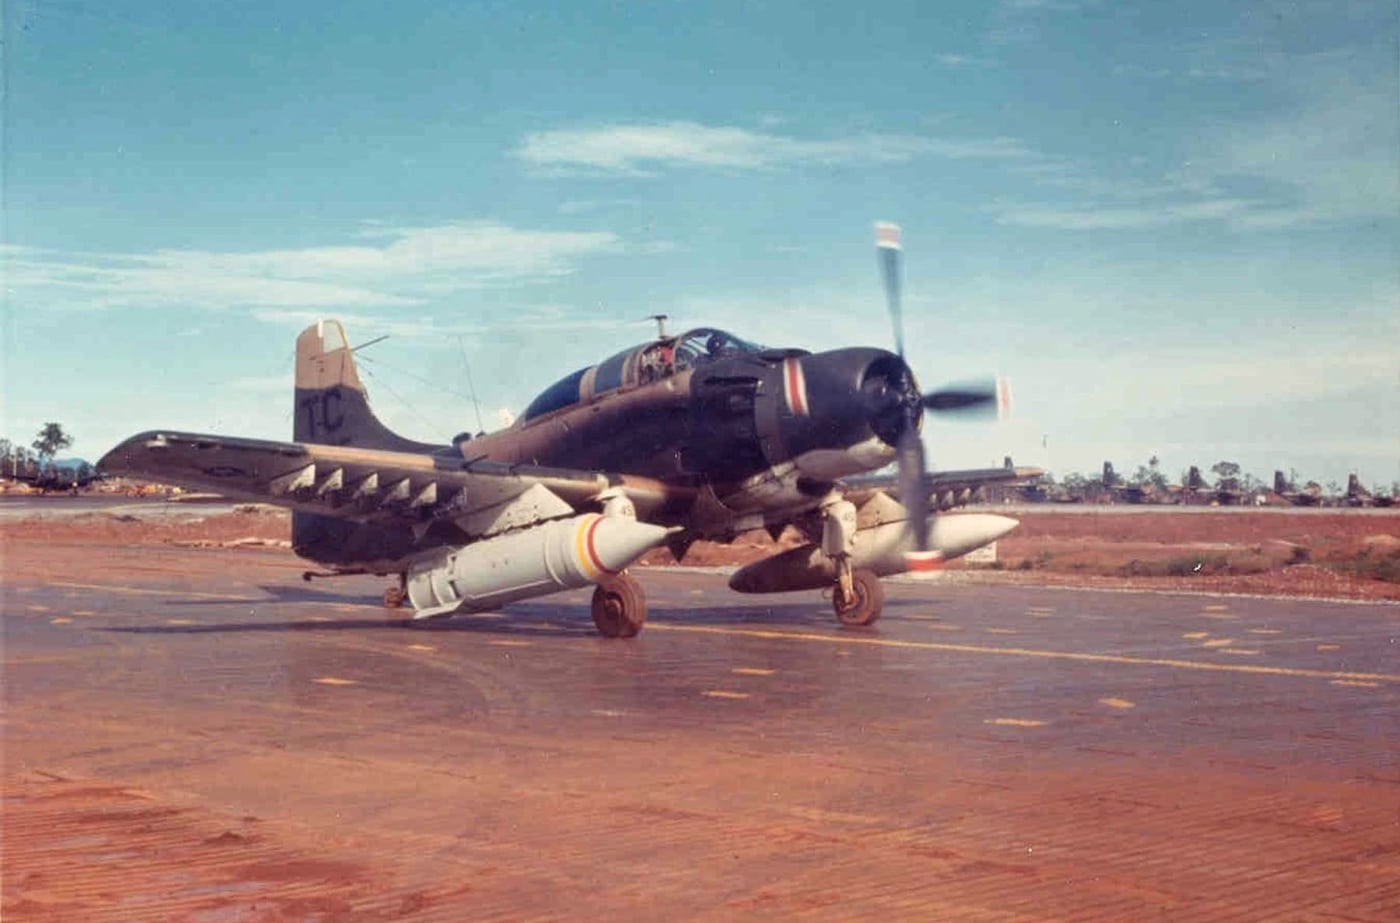 a-1e skyraider equipped with fae